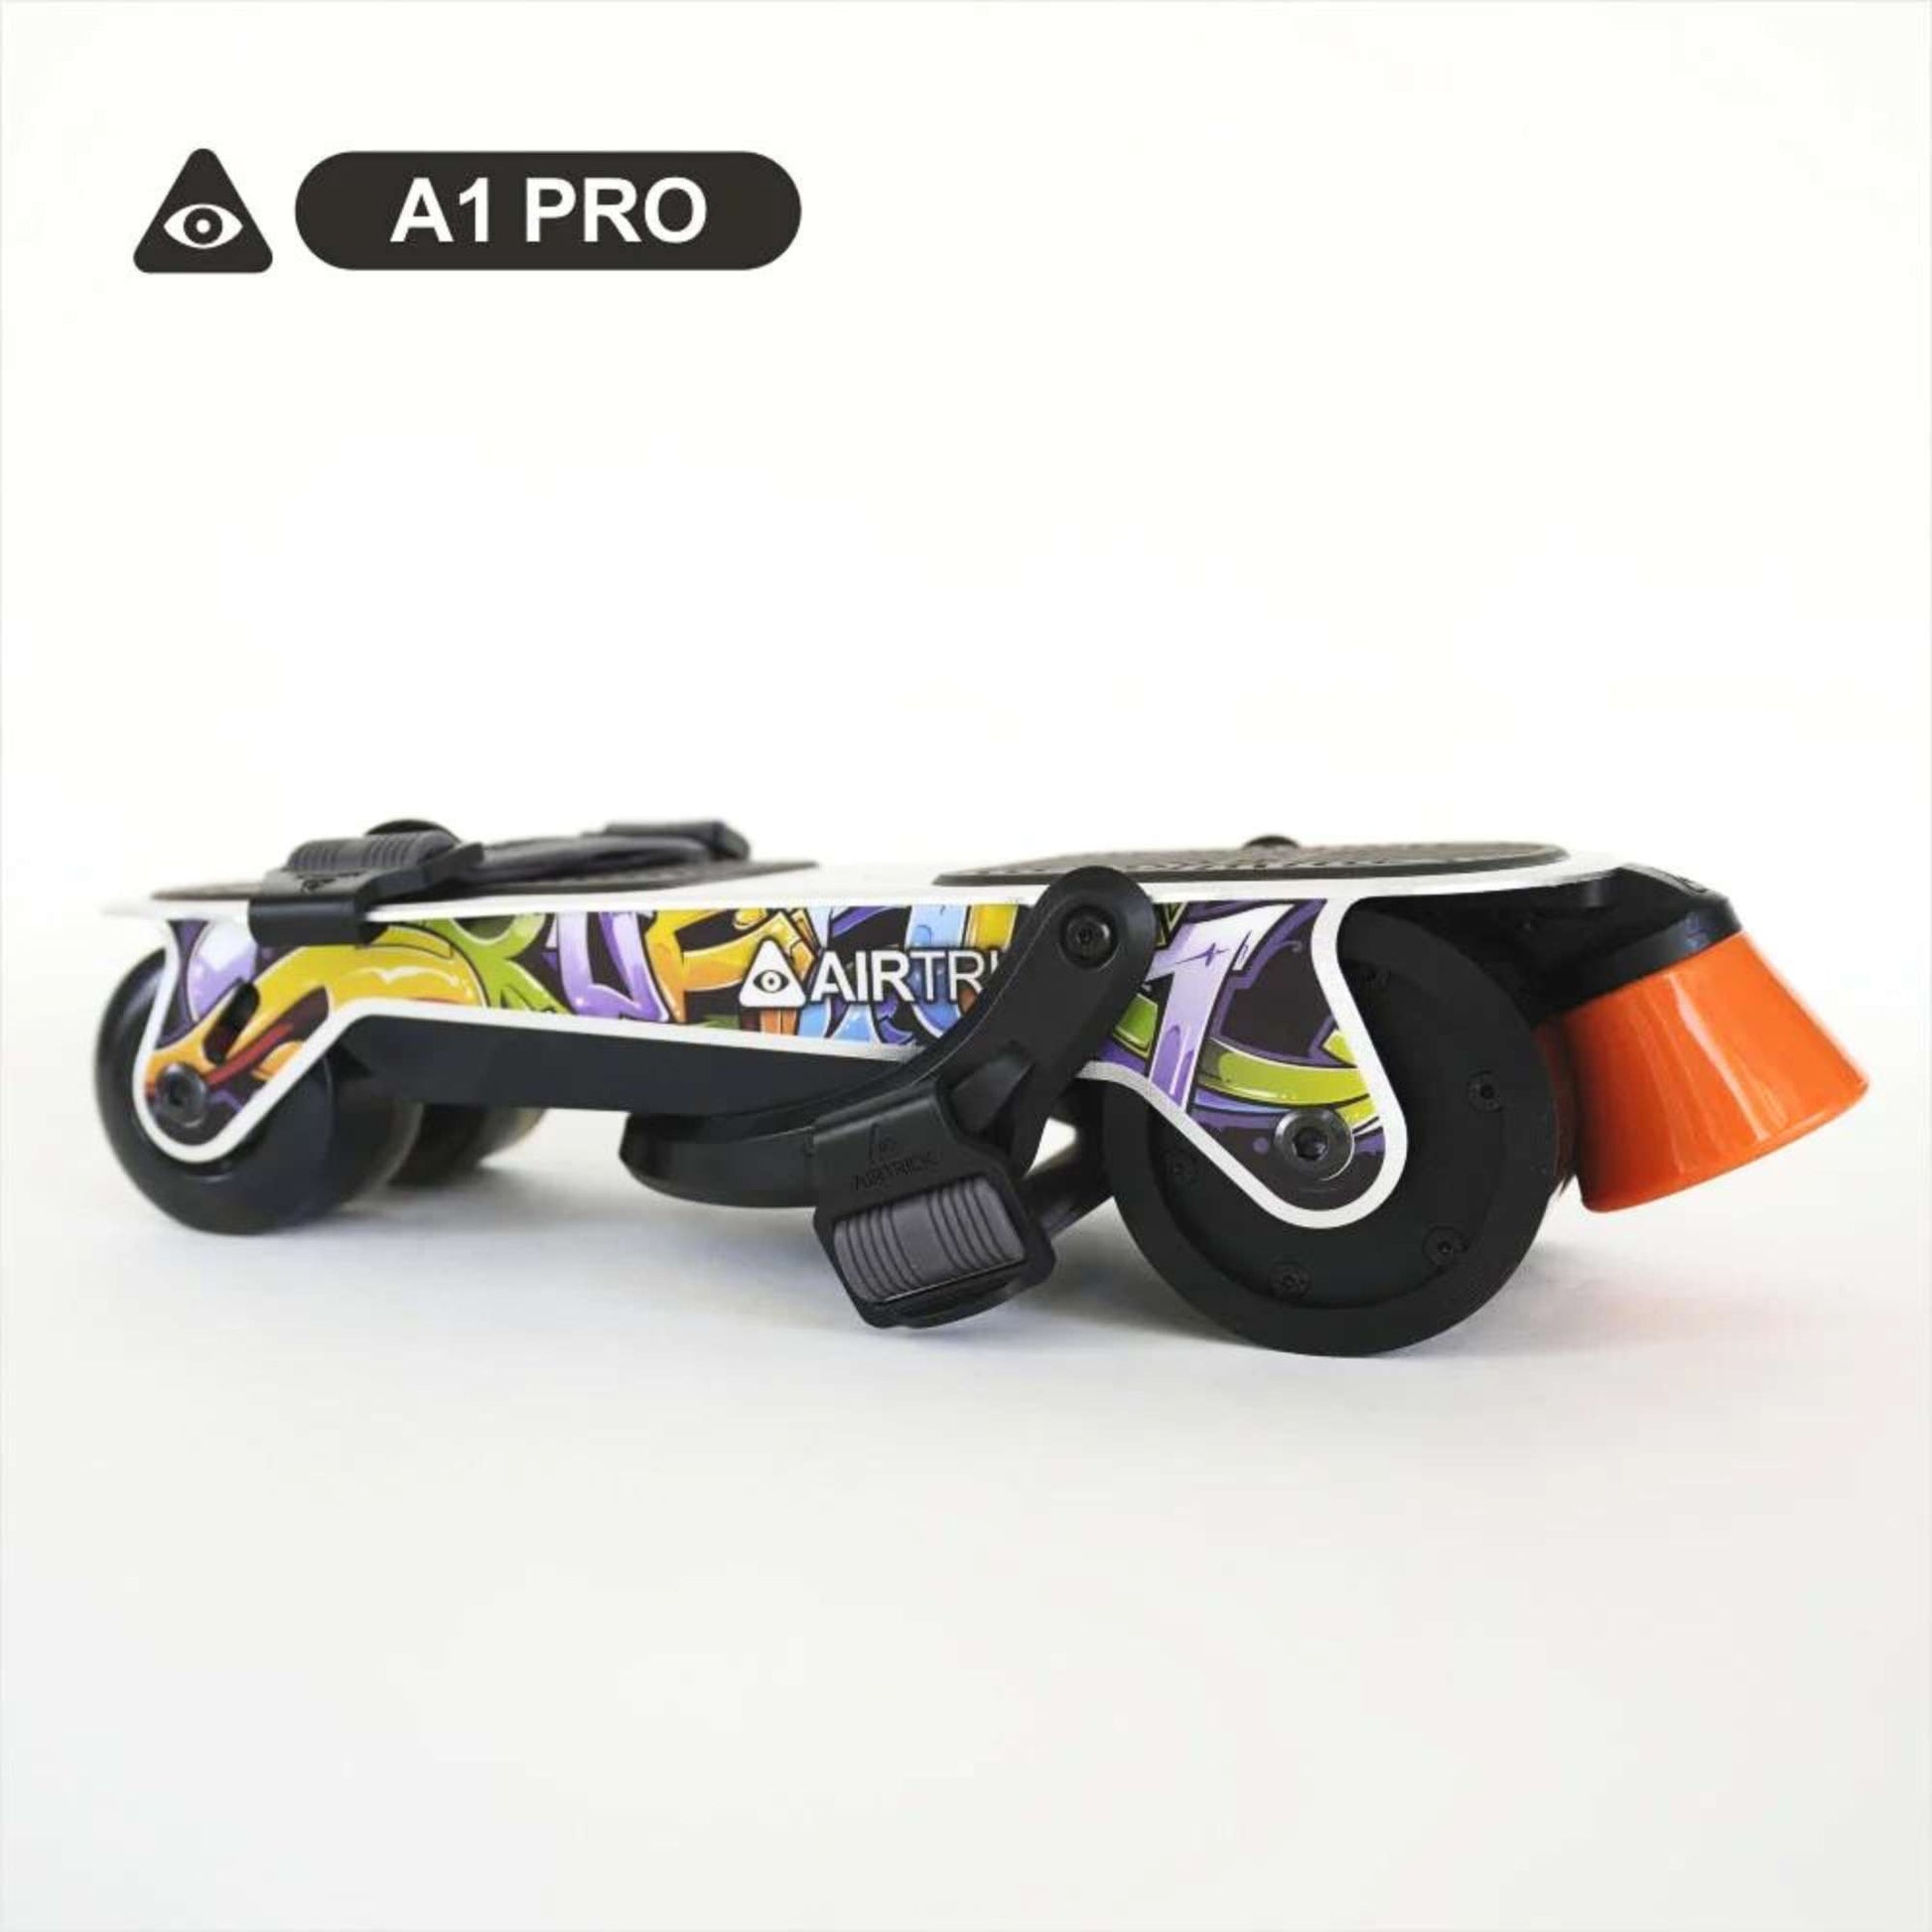 Airtrick Electric Skates | Motorized rollerblades